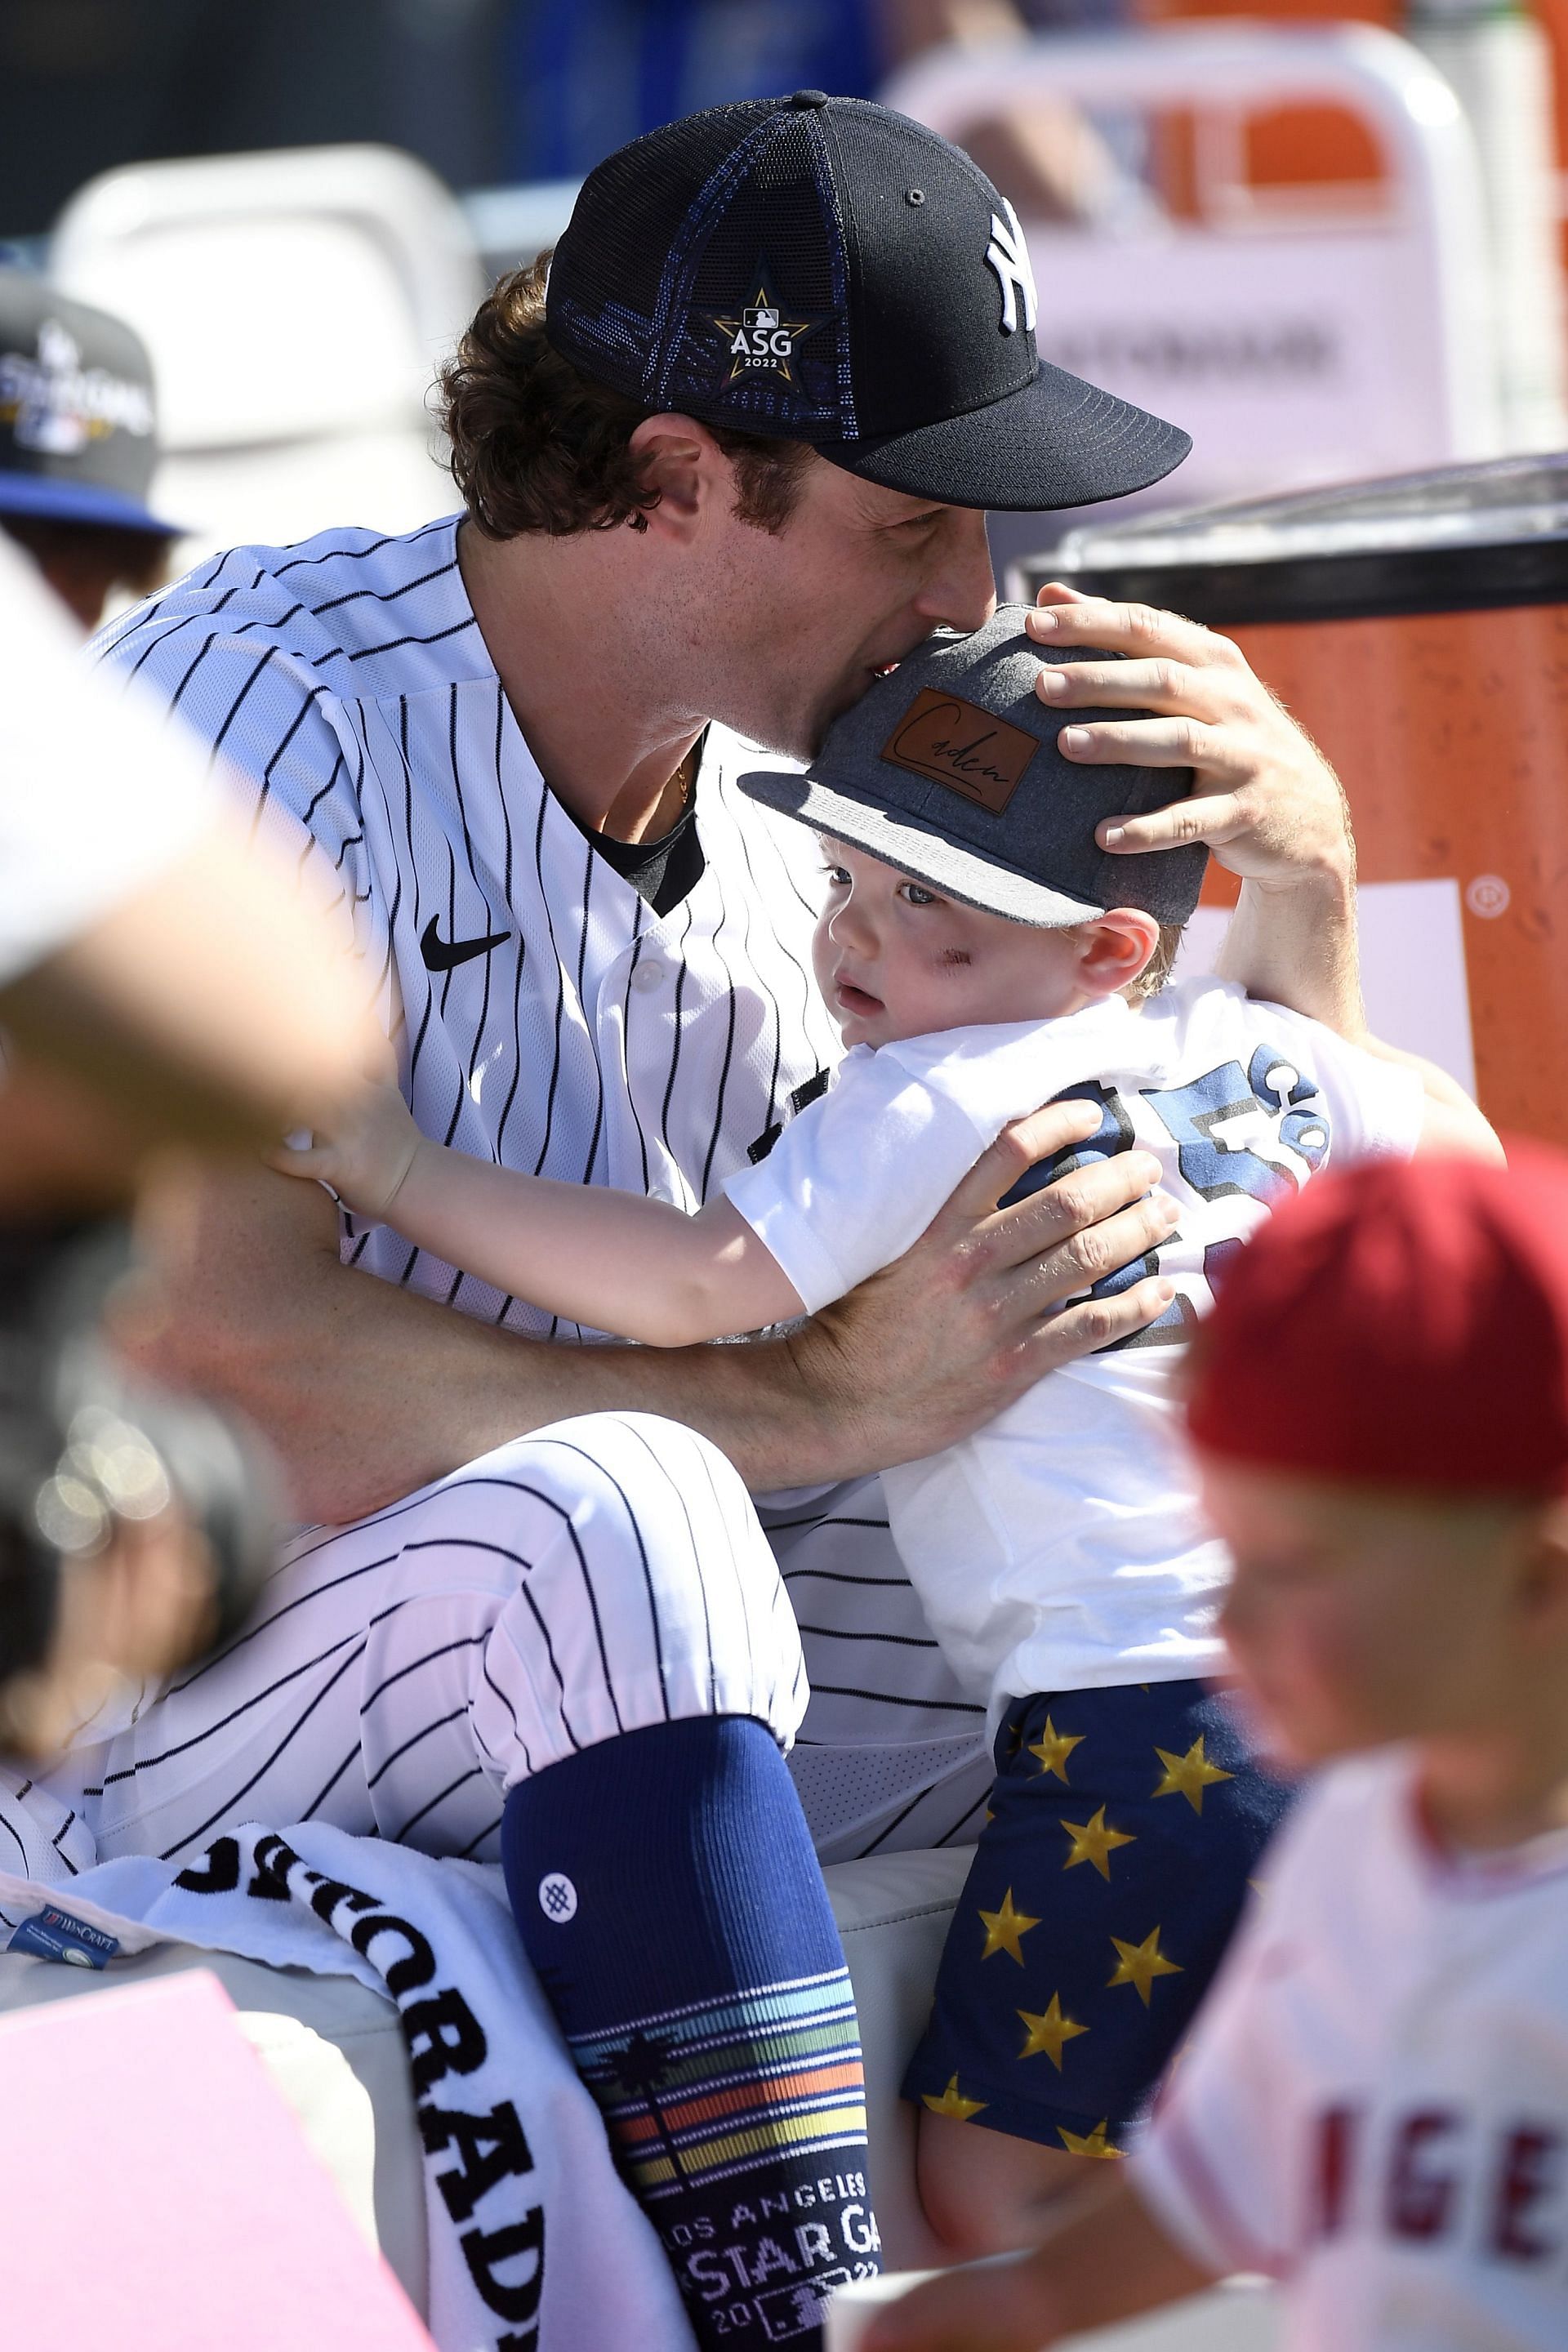 Watch: Yankees ace Gerrit Cole shares adorable moment with young son